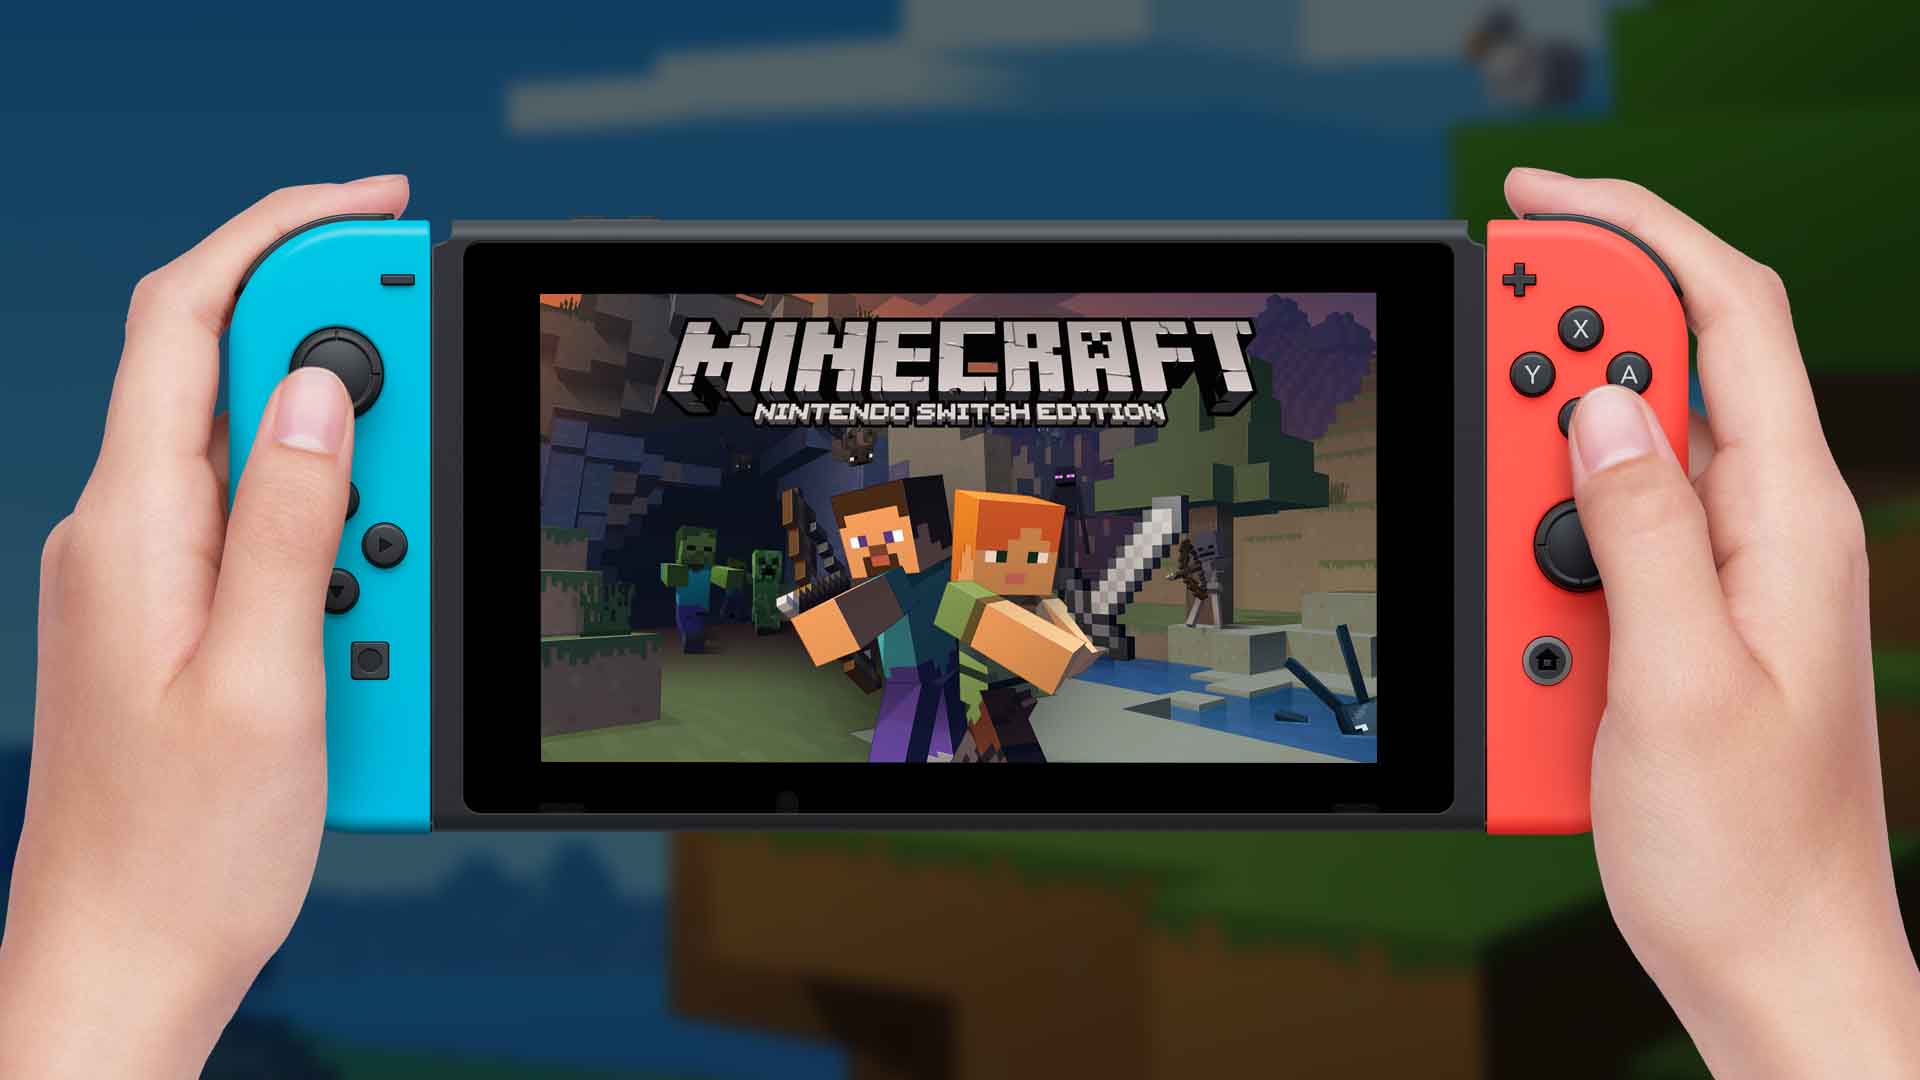 Minecraft Bedrock Edition Update 1.6.20 Is Crashing Minecraft And Is Even Causing Other Games To Malfunction